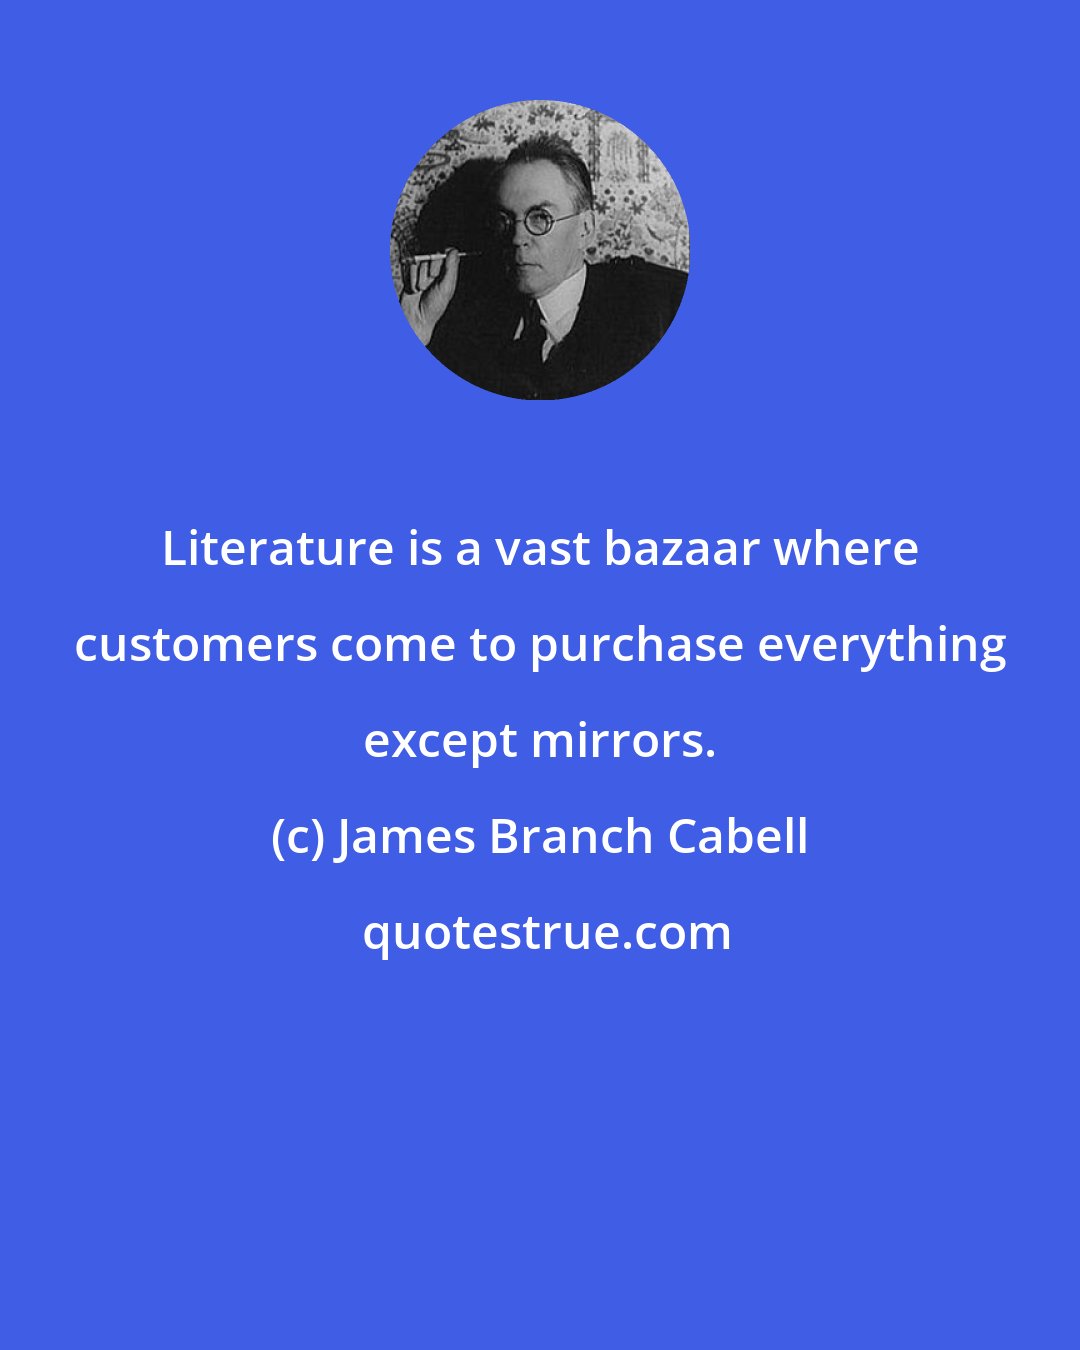 James Branch Cabell: Literature is a vast bazaar where customers come to purchase everything except mirrors.